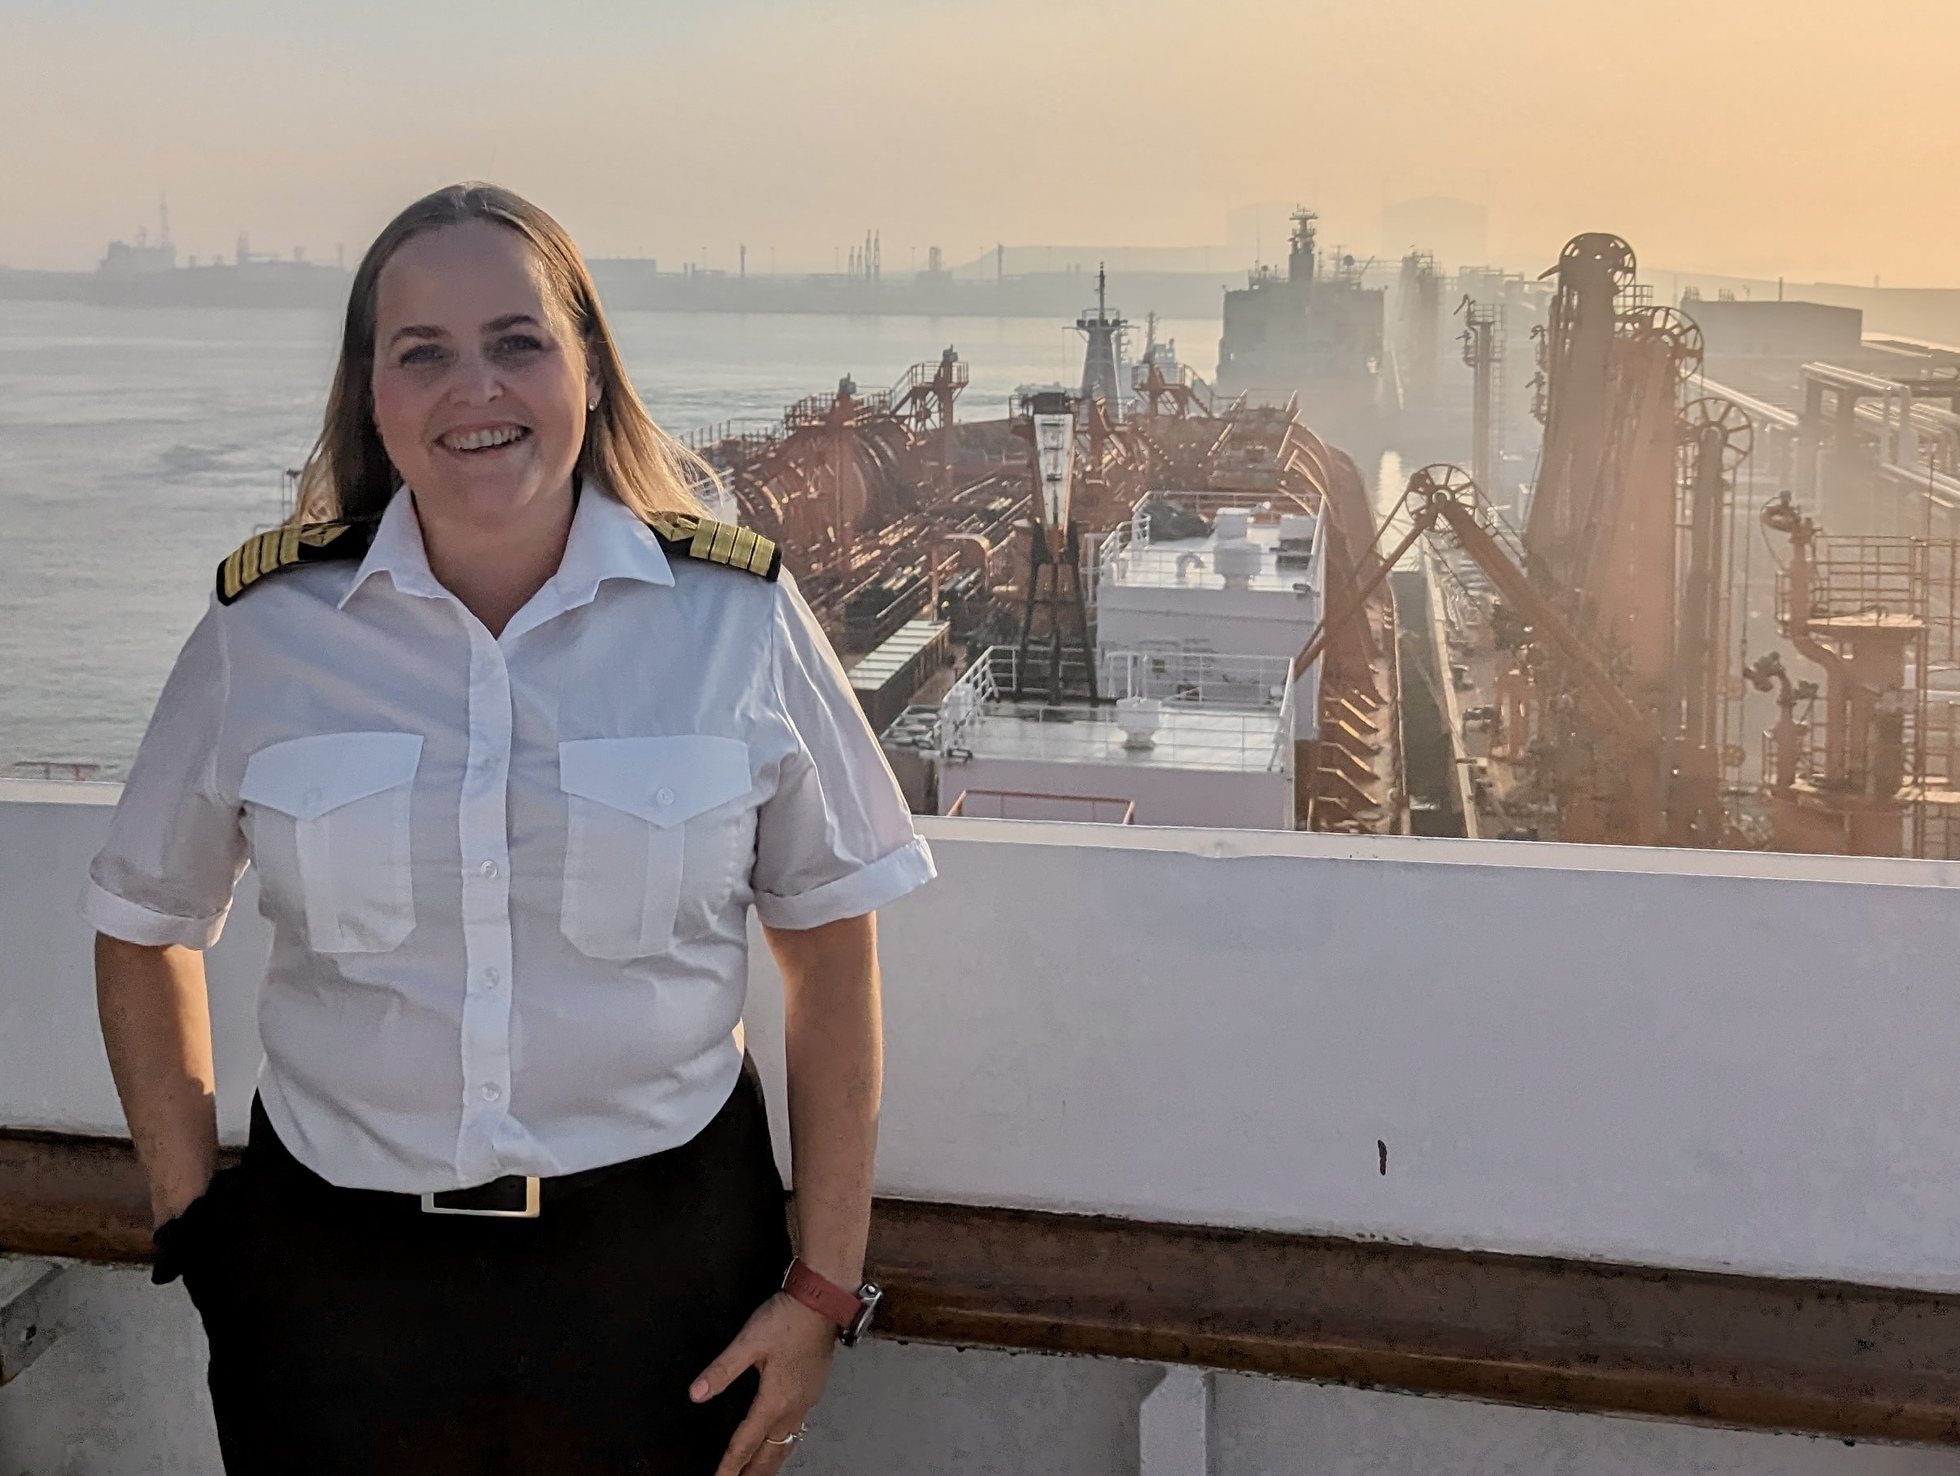 A woman in a captain's uniform smiling with a view of the port behind her